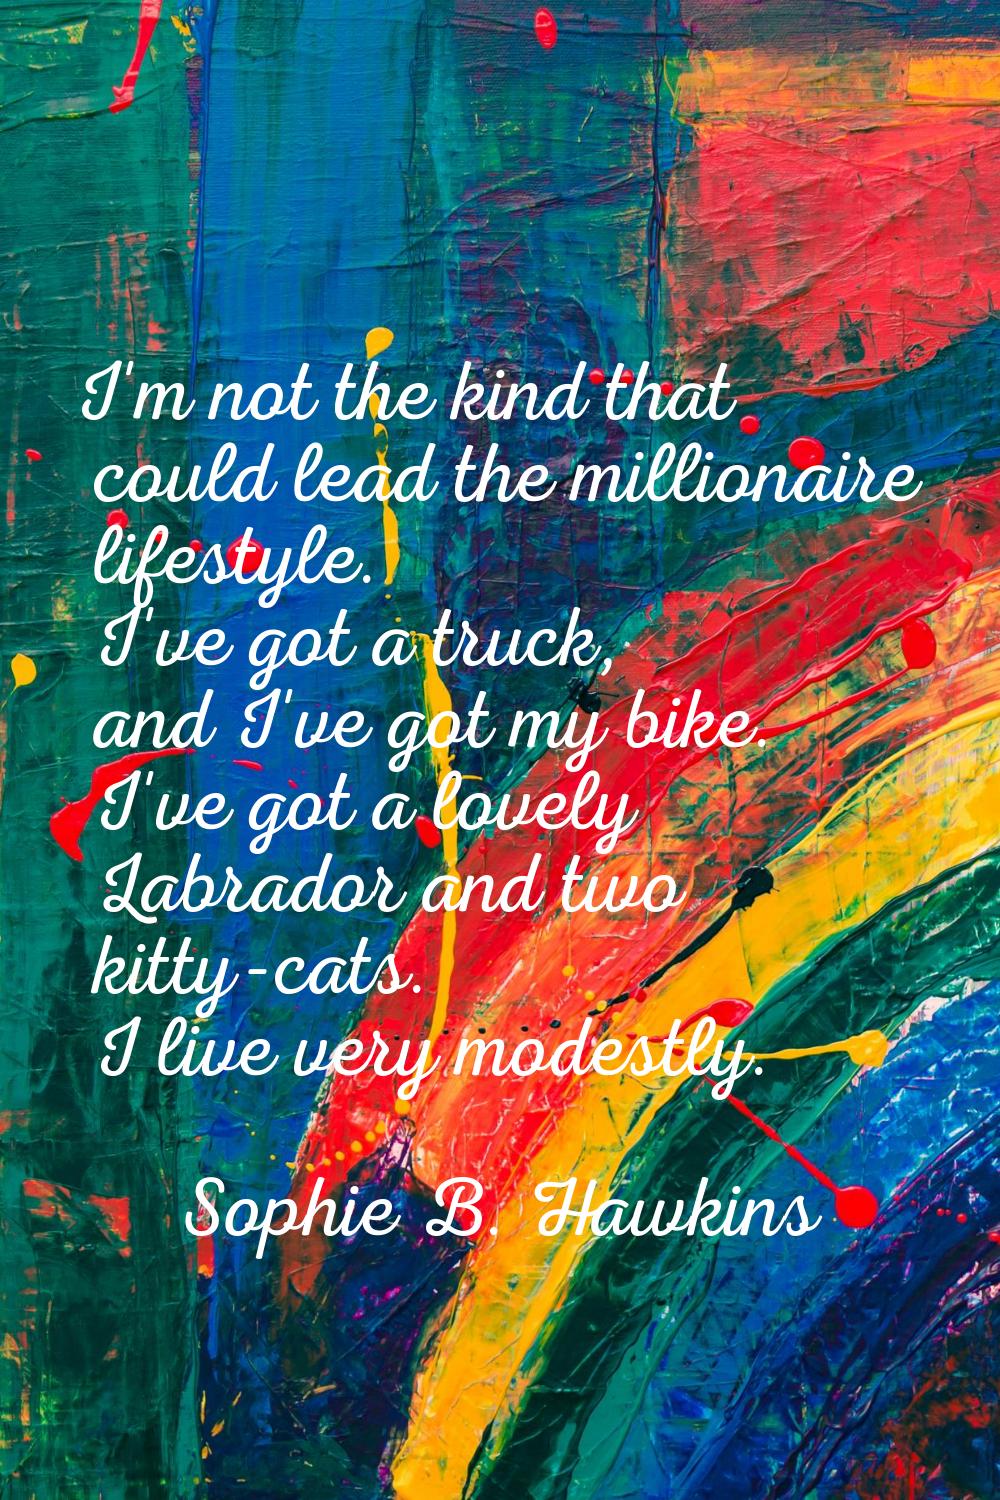 I'm not the kind that could lead the millionaire lifestyle. I've got a truck, and I've got my bike.